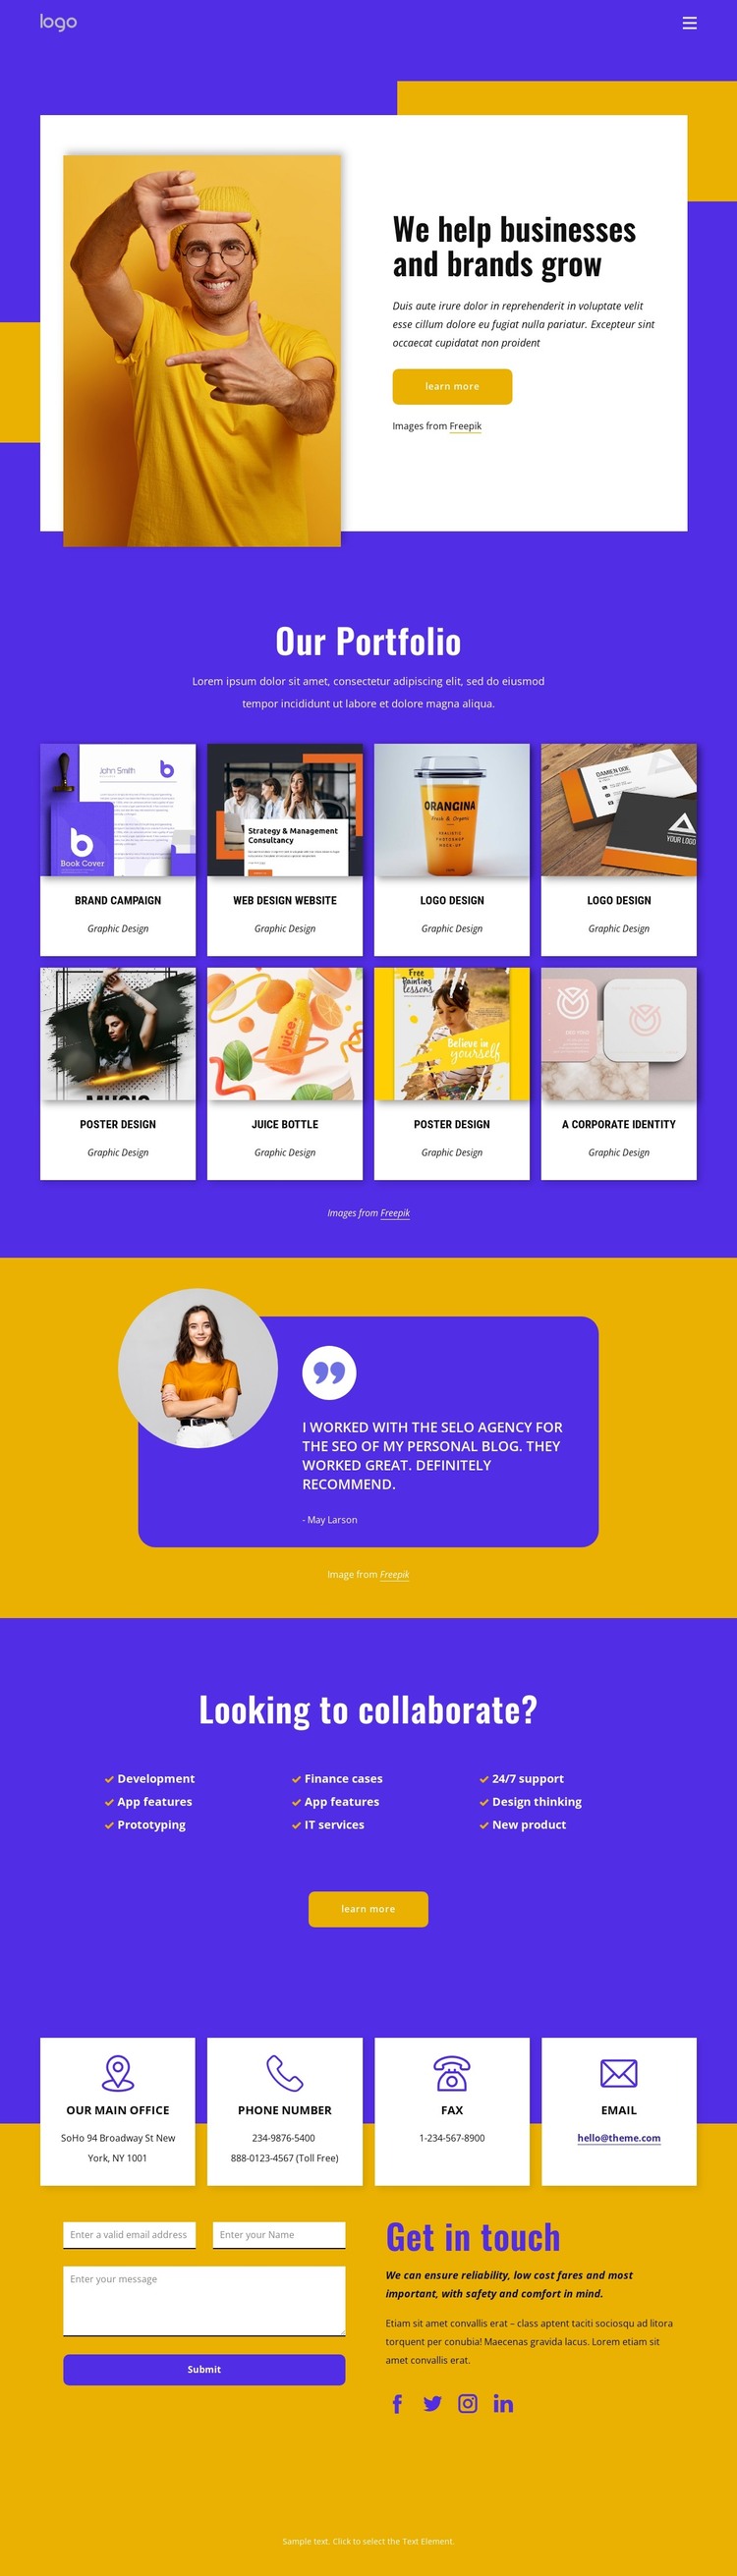 We design digital products and brands WordPress Theme